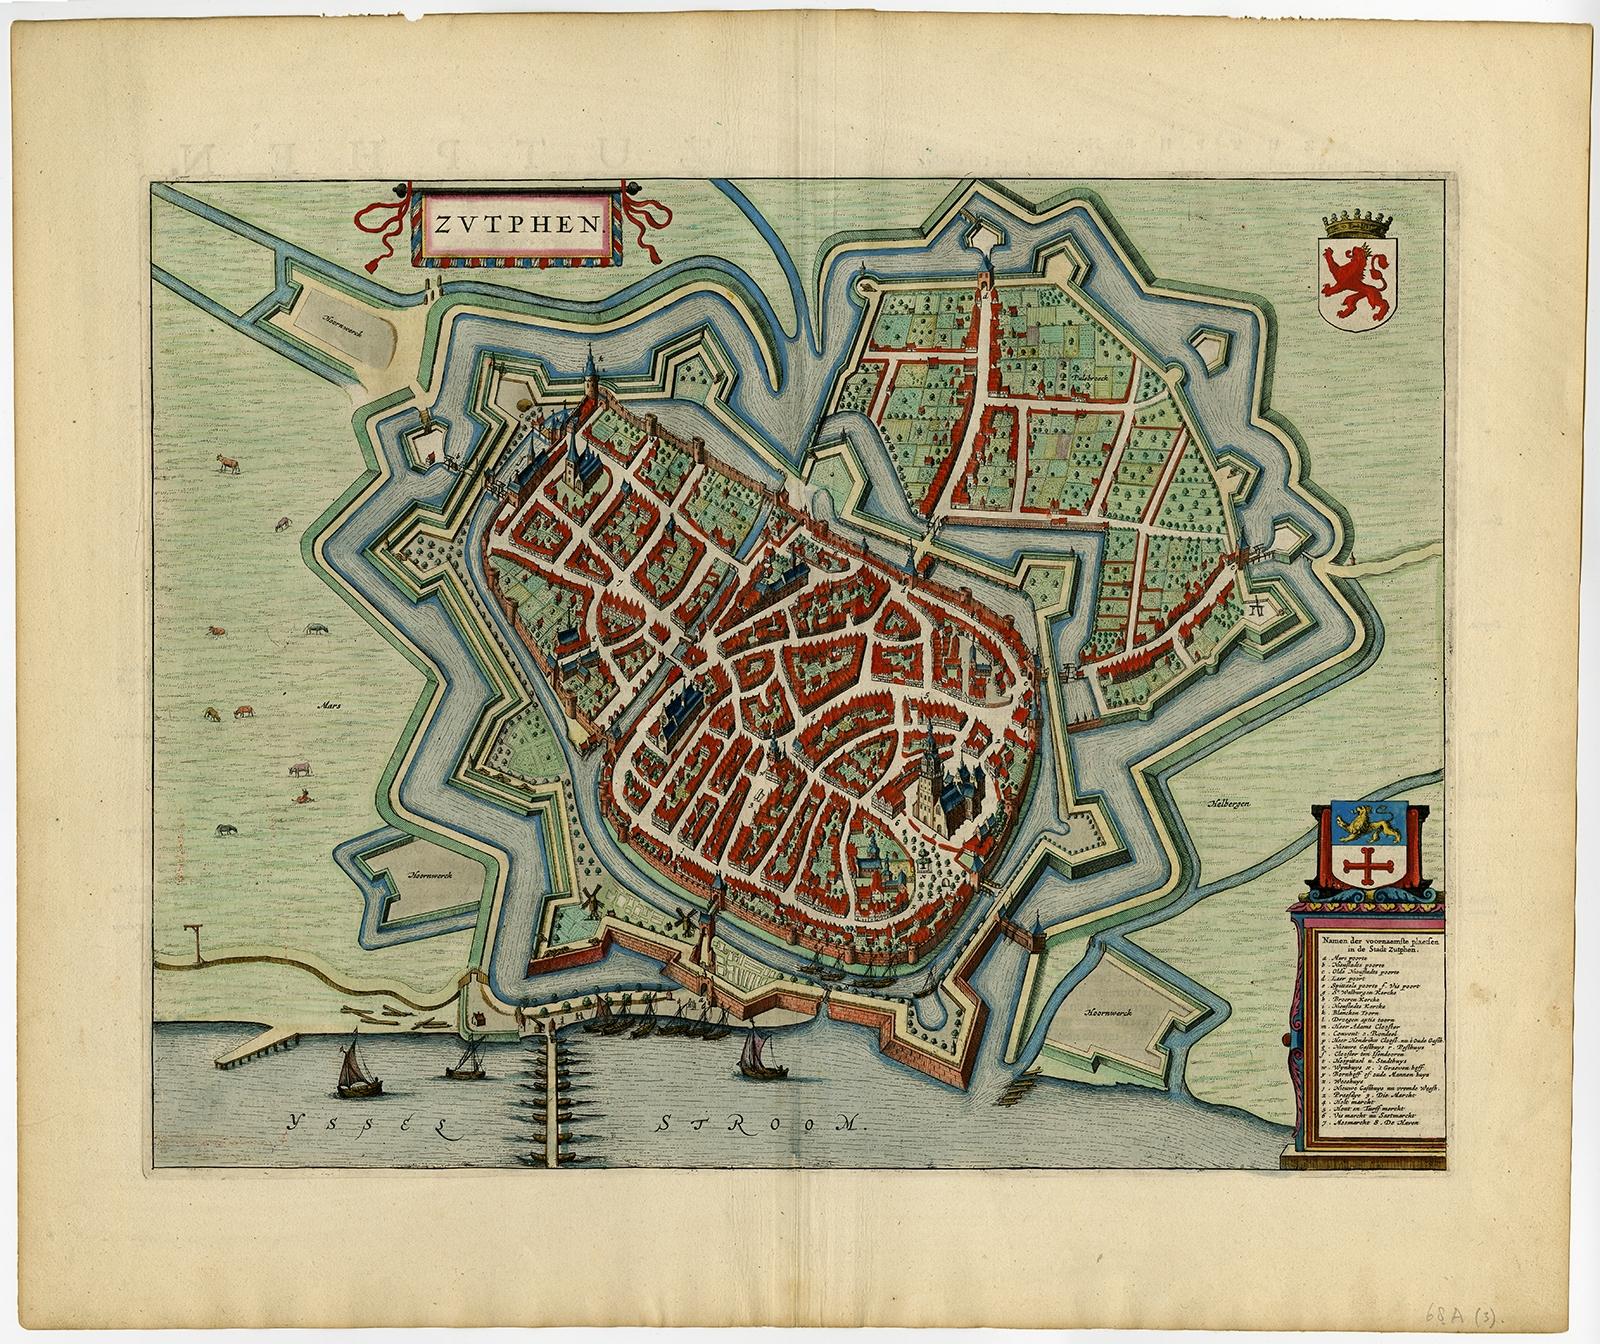 Antique print, titled: 'Zutphen.' - Bird's-eye view plan of Zutphen in The Netherlands, with key to locations and coats of arms. Text in Dutch on verso. This plan originates from the famous city Atlas: 'Toneel der Steeden' published by Joan Blaeu